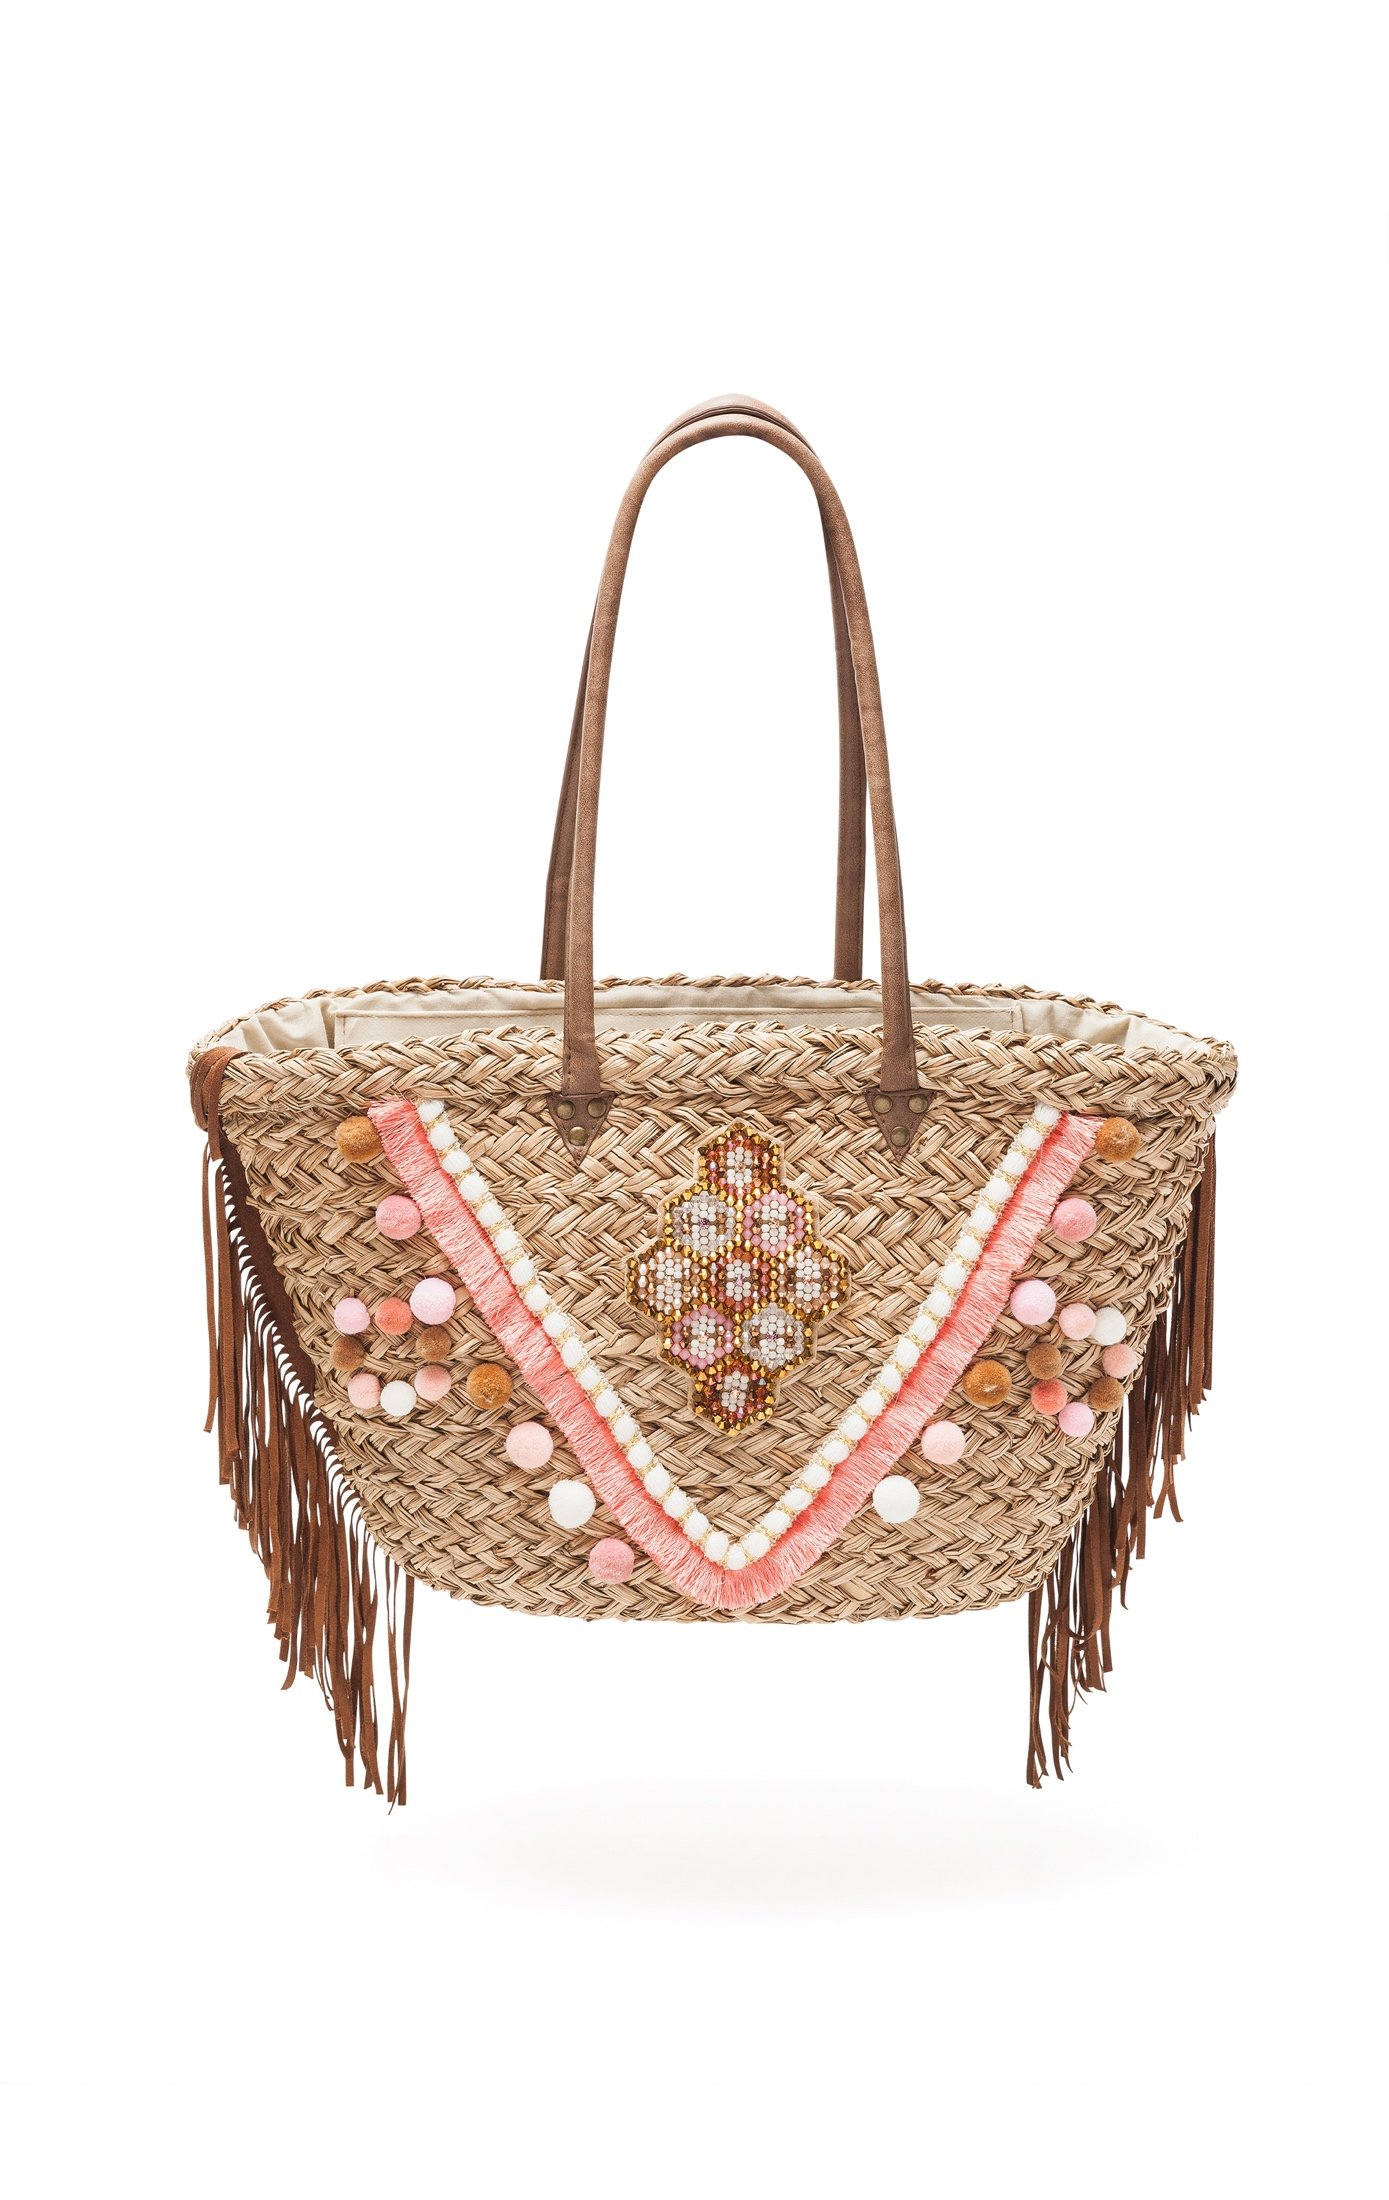 Braided straw basket embroidered with pearls and pompons